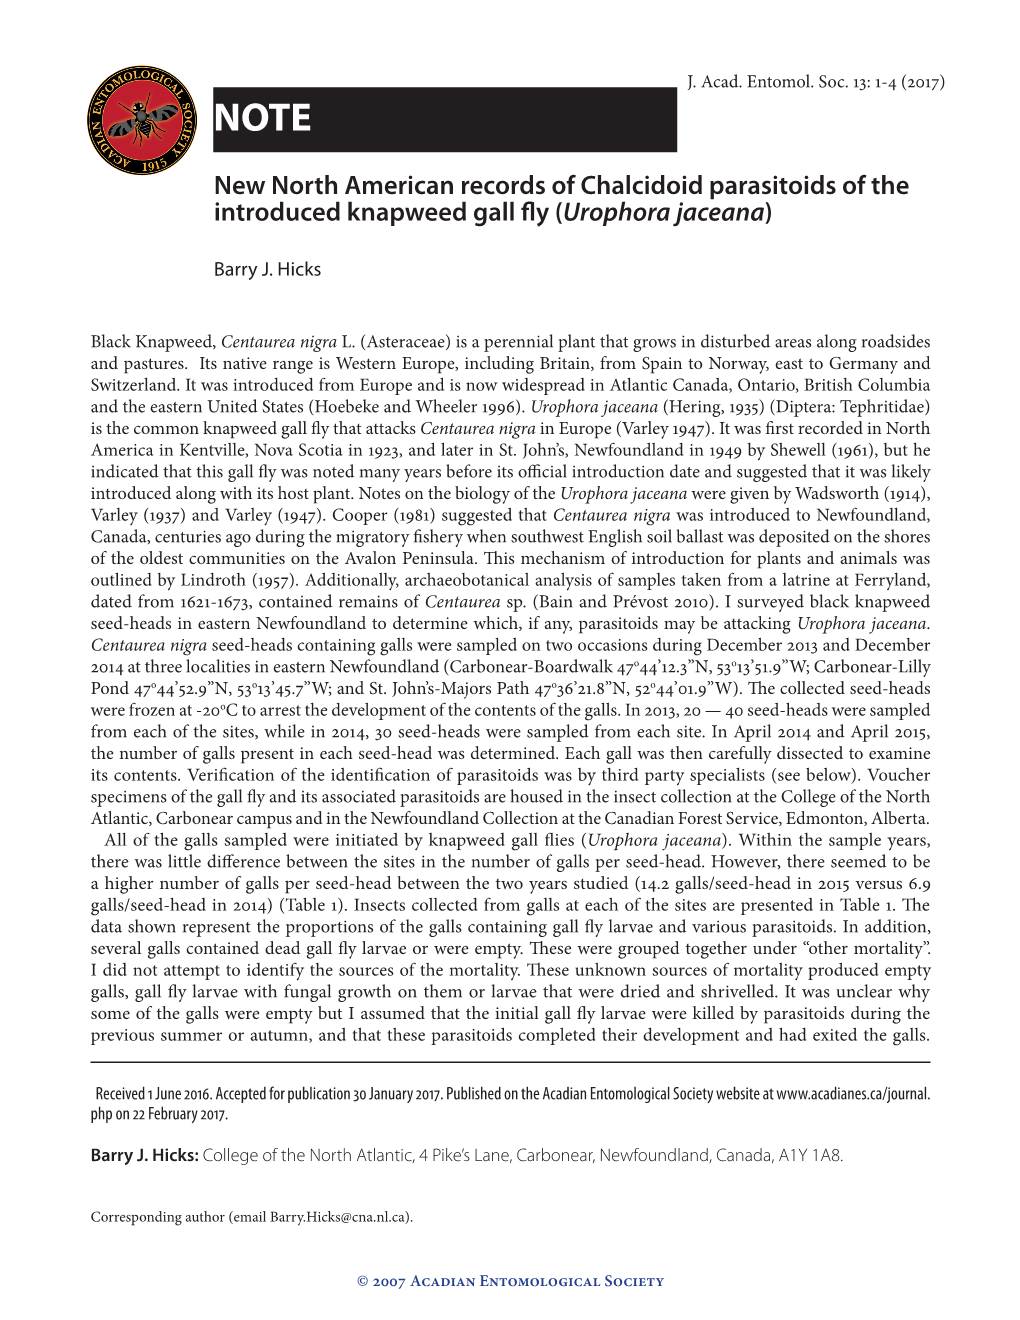 New North American Records of Chalcidoid Parasitoids of the Introduced Knapweed Gall Fly Urophora( Jaceana)